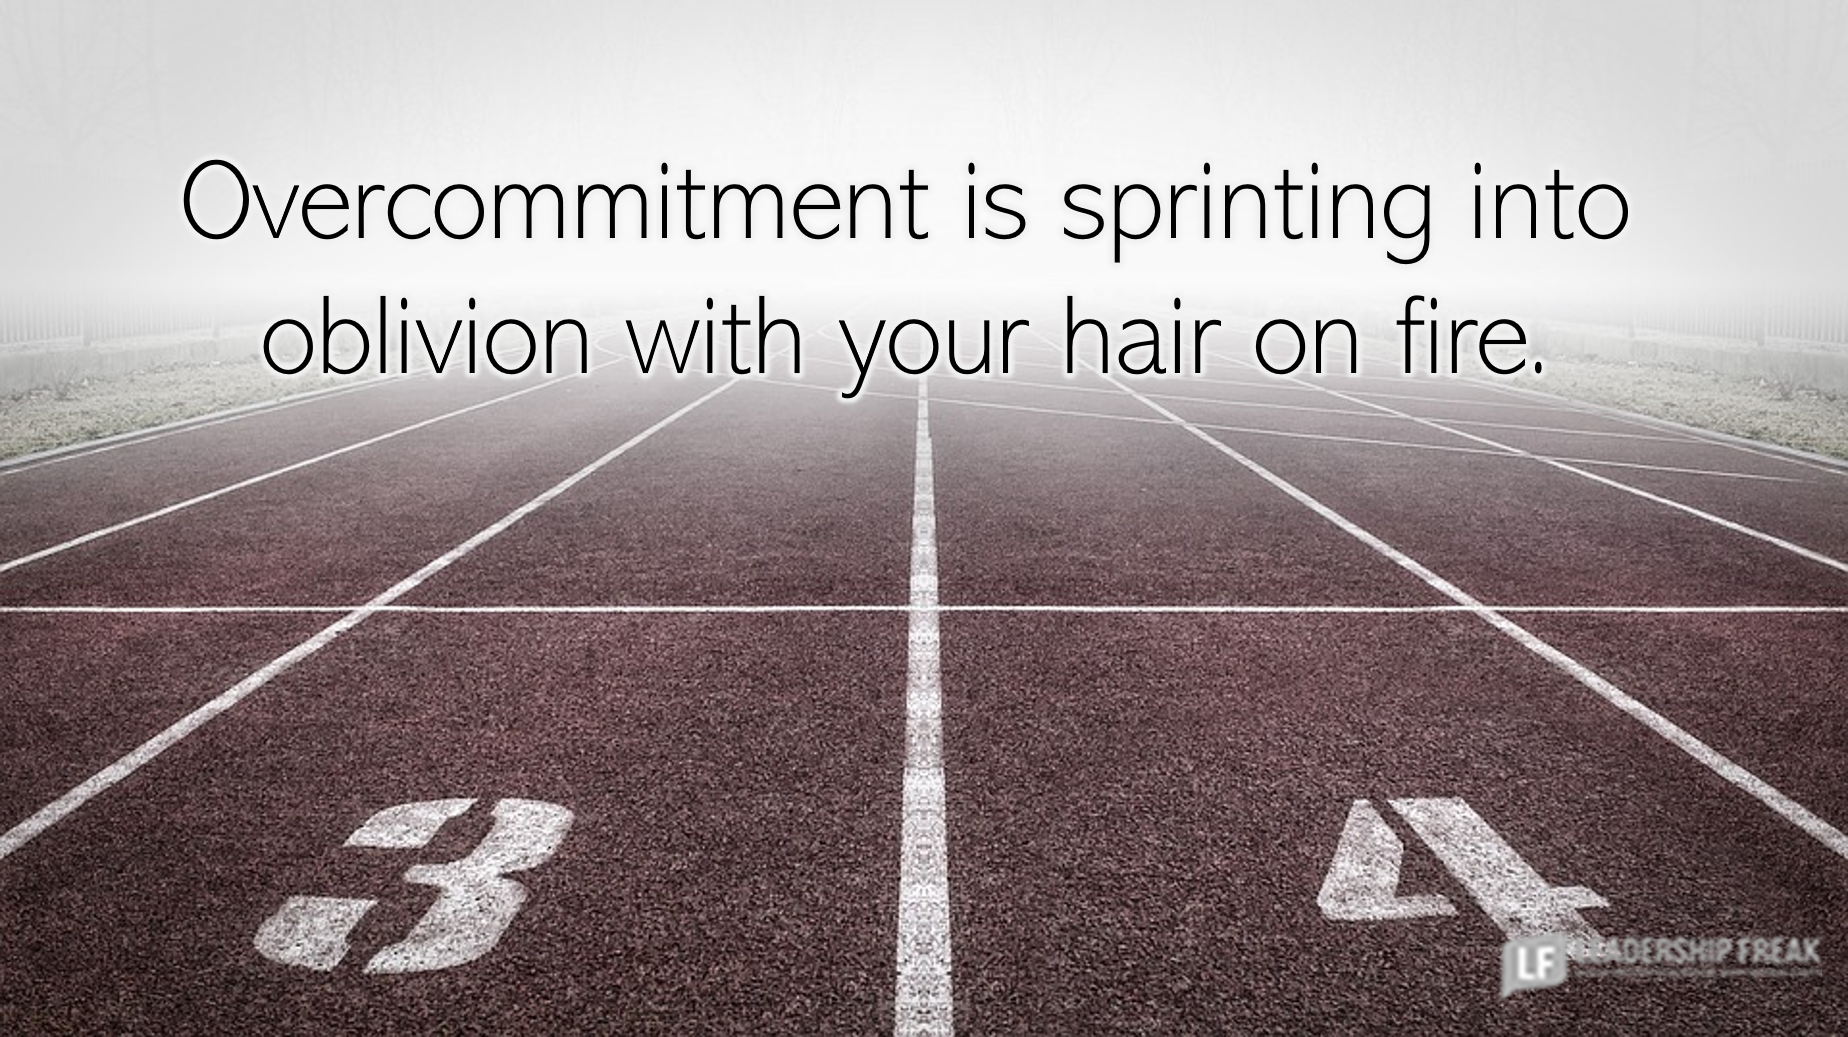 Track

Overcommitment is sprinting into oblivion with your hair on fire.